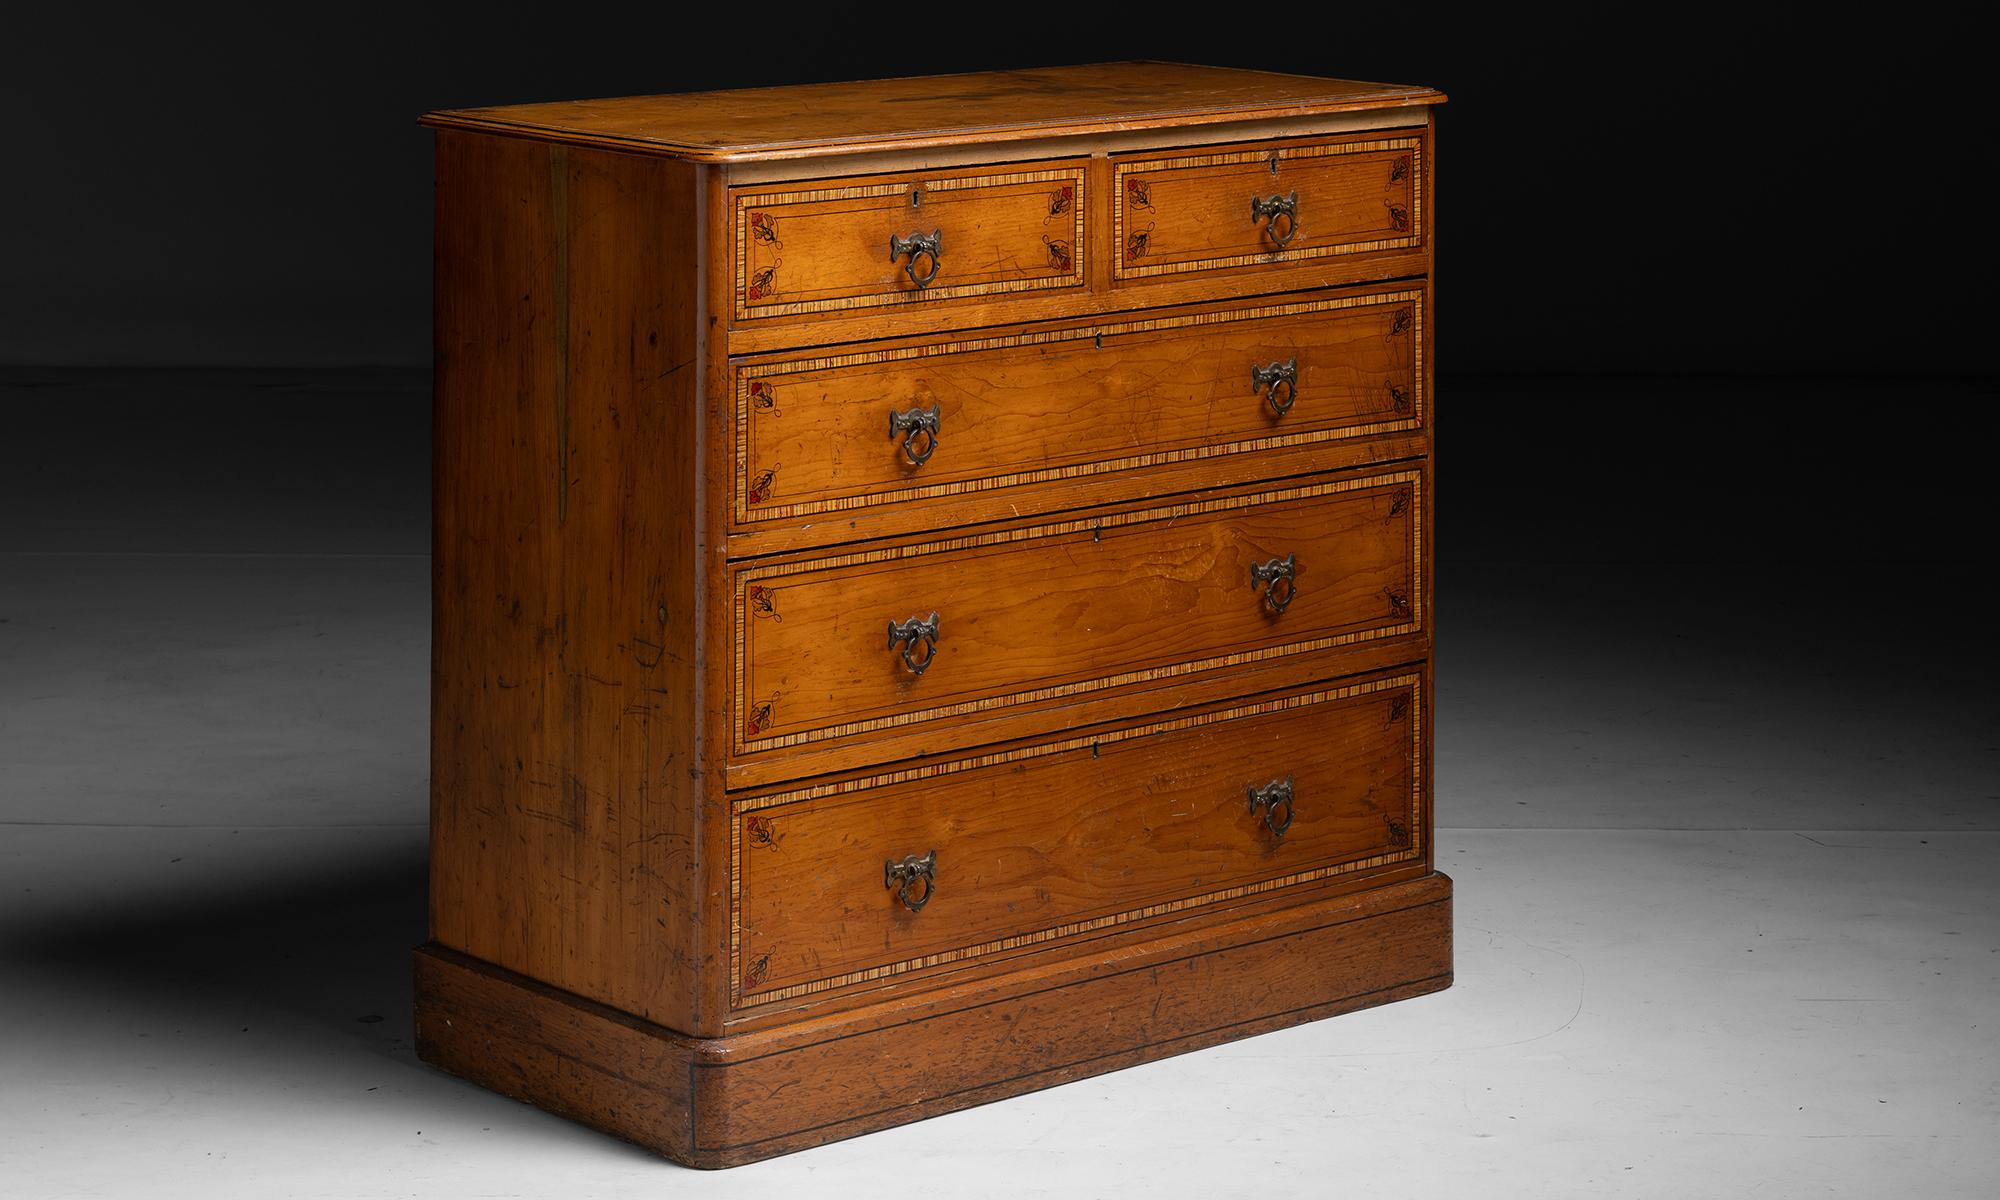 Victorian Chest of Drawers

England circa 1890

Grained pine chest with painted ebonies stringing, foliate ornament and faux cross banding.

Measures 42”w x 20.5”d x 39”h